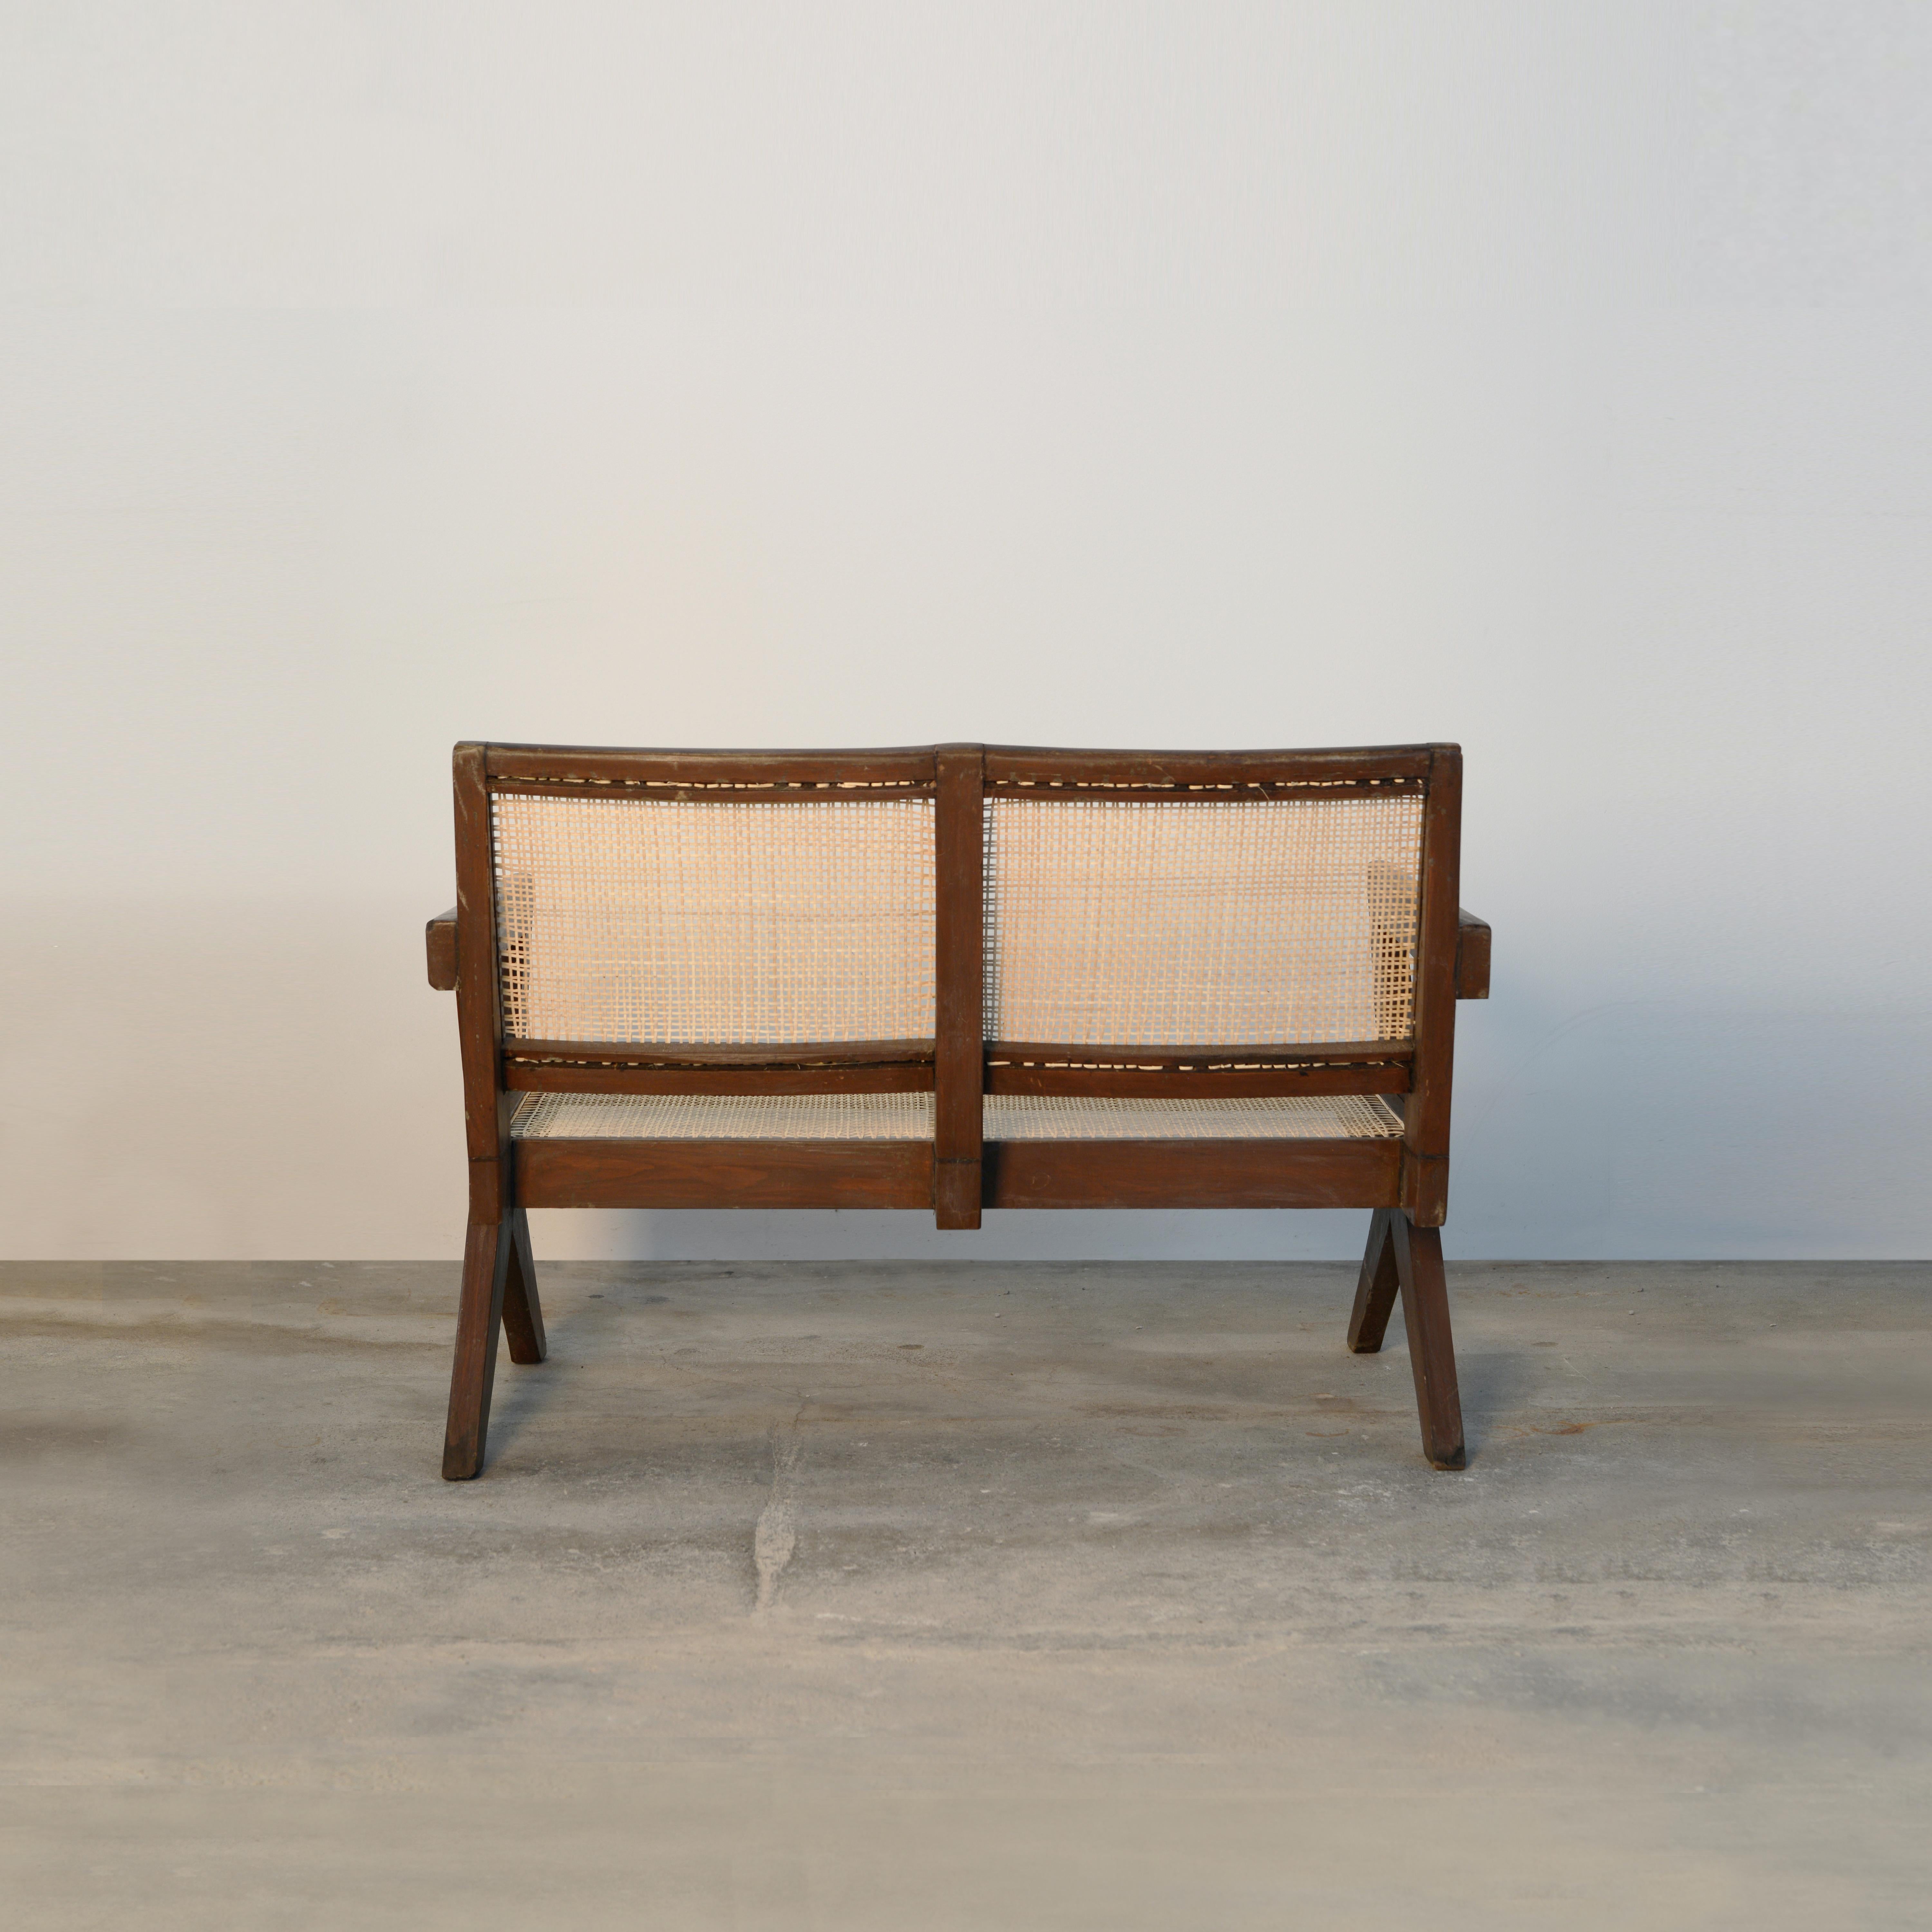 Mid-20th Century Pierre Jeanneret PJ-SI-Cane Sofa / Authentic Mid-Century Modern For Sale